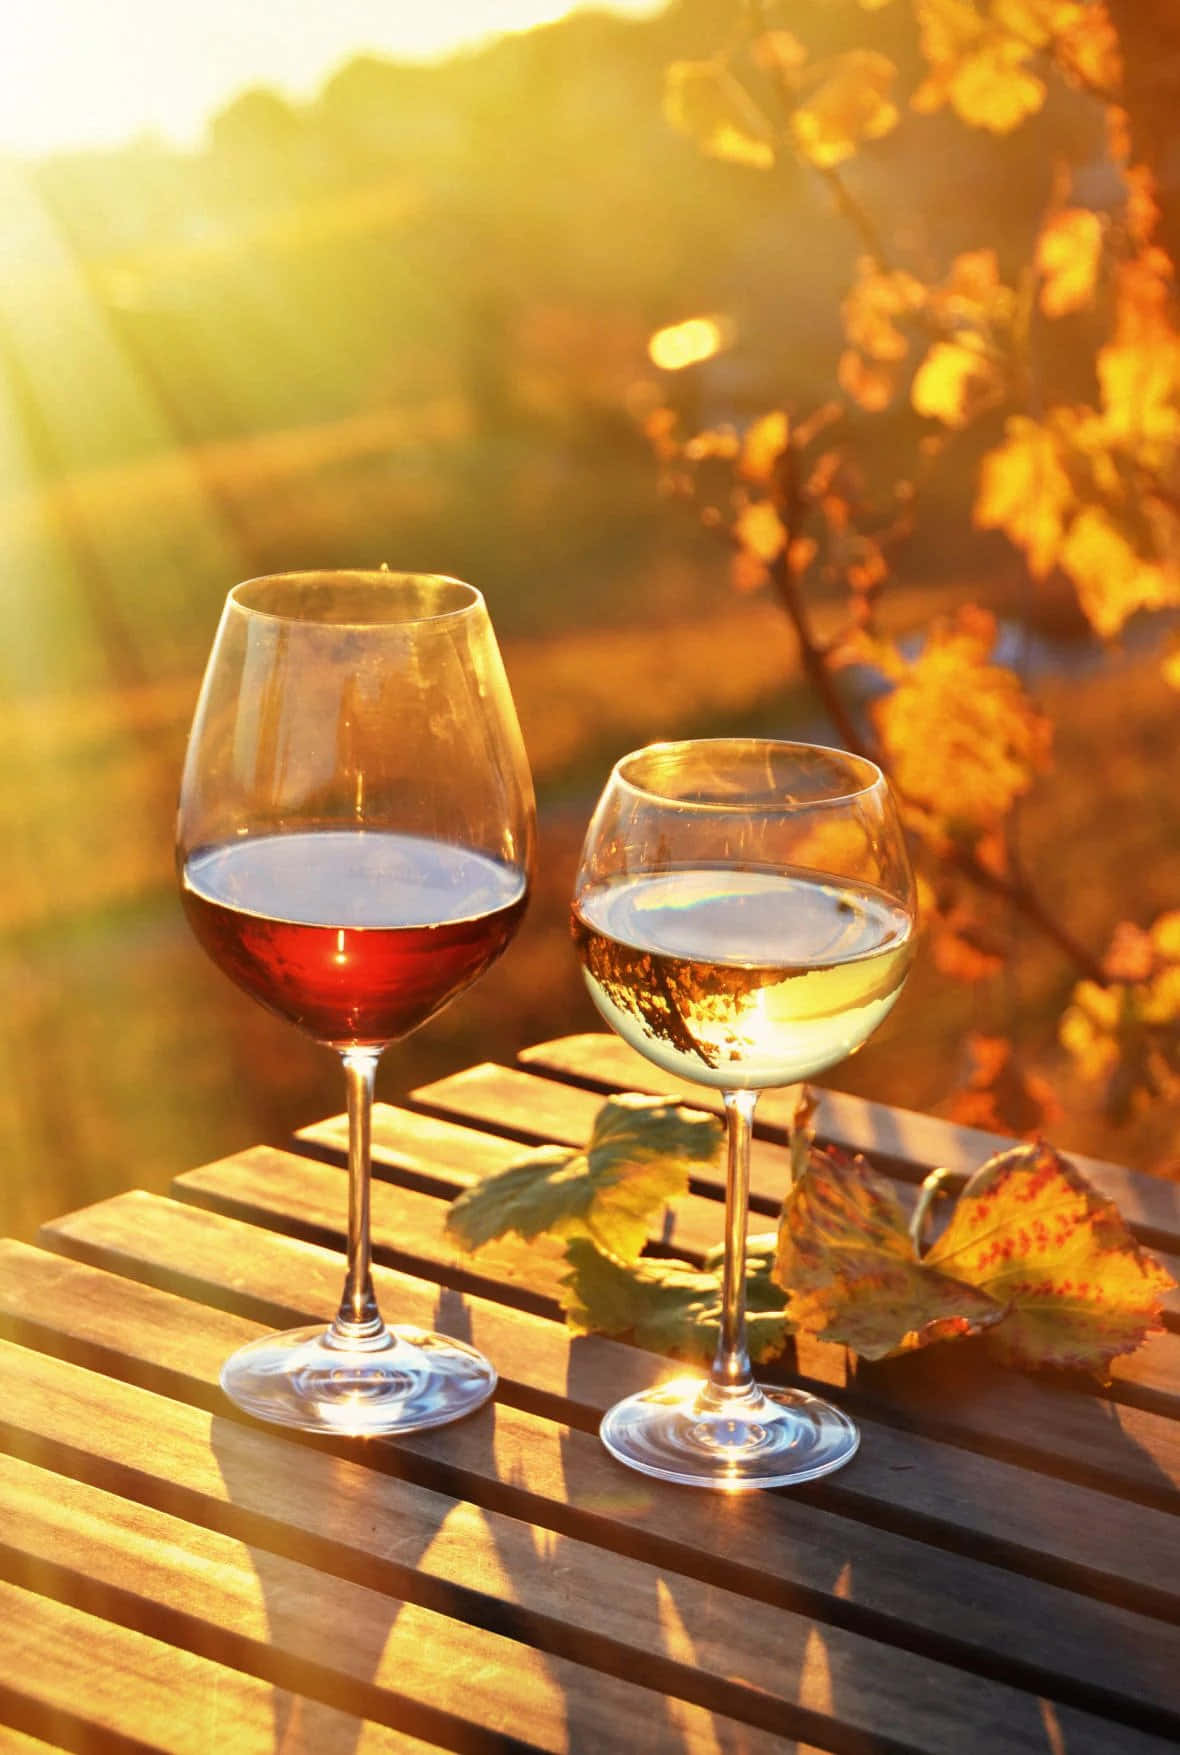 A glass of wine – the perfect way to unwind after a long day.